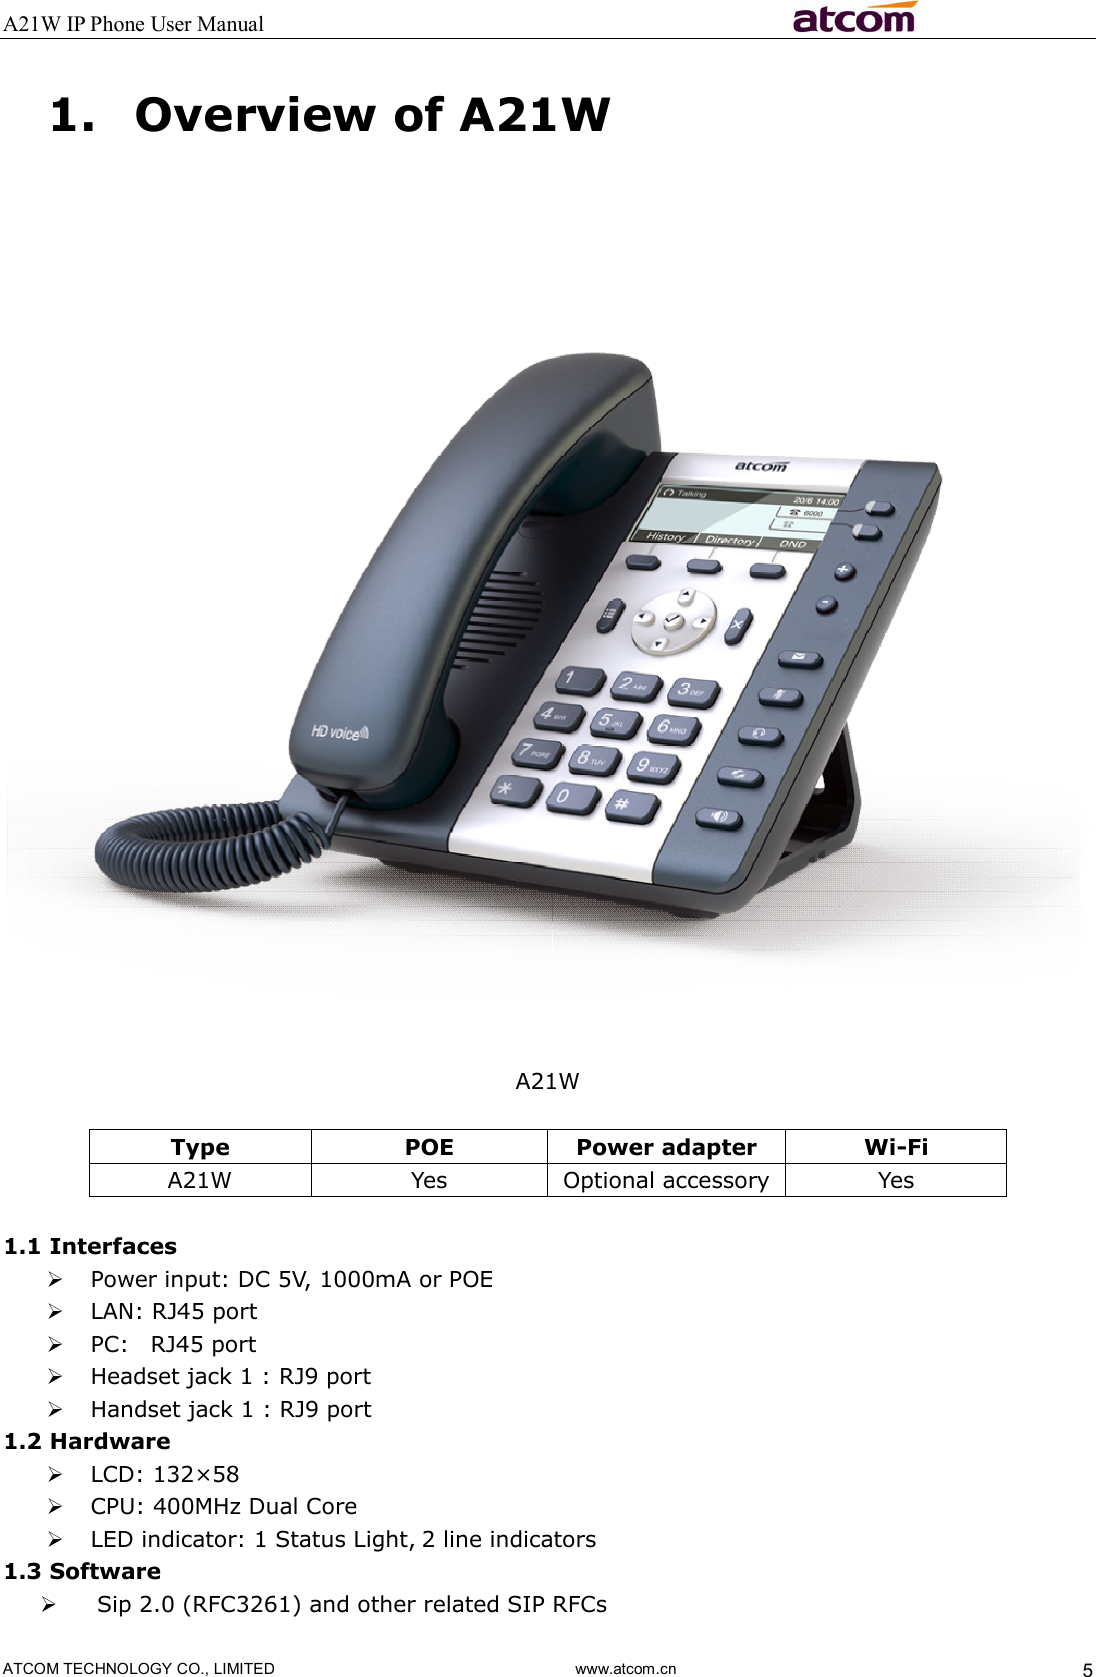 A21W IP Phone User Manual                                                          ATCOM TECHNOLOGY CO., LIMITED                              www.atcom.cn  5 1. Overview of A21W   A21W  Type  POE  Power adapter  Wi-Fi A21W  Yes  Optional accessory  Yes  1.1 Interfaces  Power input: DC 5V, 1000mA or POE  LAN: RJ45 port  PC:    RJ45 port  Headset jack 1 : RJ9 port    Handset jack 1 : RJ9 port 1.2 Hardware  LCD: 132×58    CPU: 400MHz Dual Core  LED indicator: 1 Status Light, 2 line indicators 1.3 Software  Sip 2.0 (RFC3261) and other related SIP RFCs 